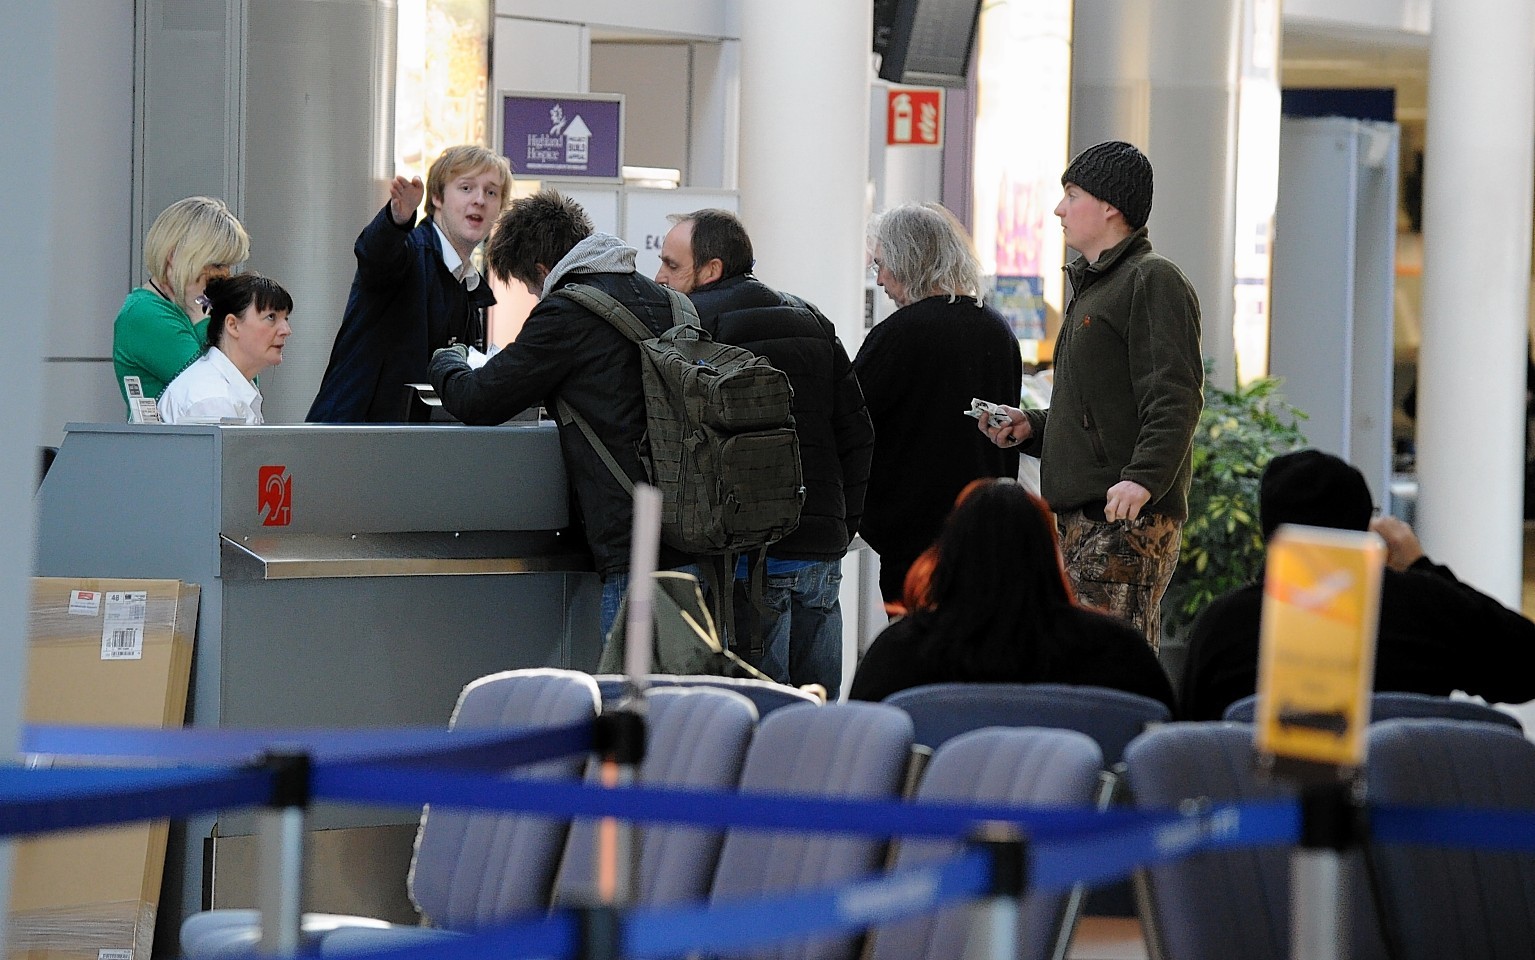 Passengers have safely been taken off the plane and into Inverness Airport